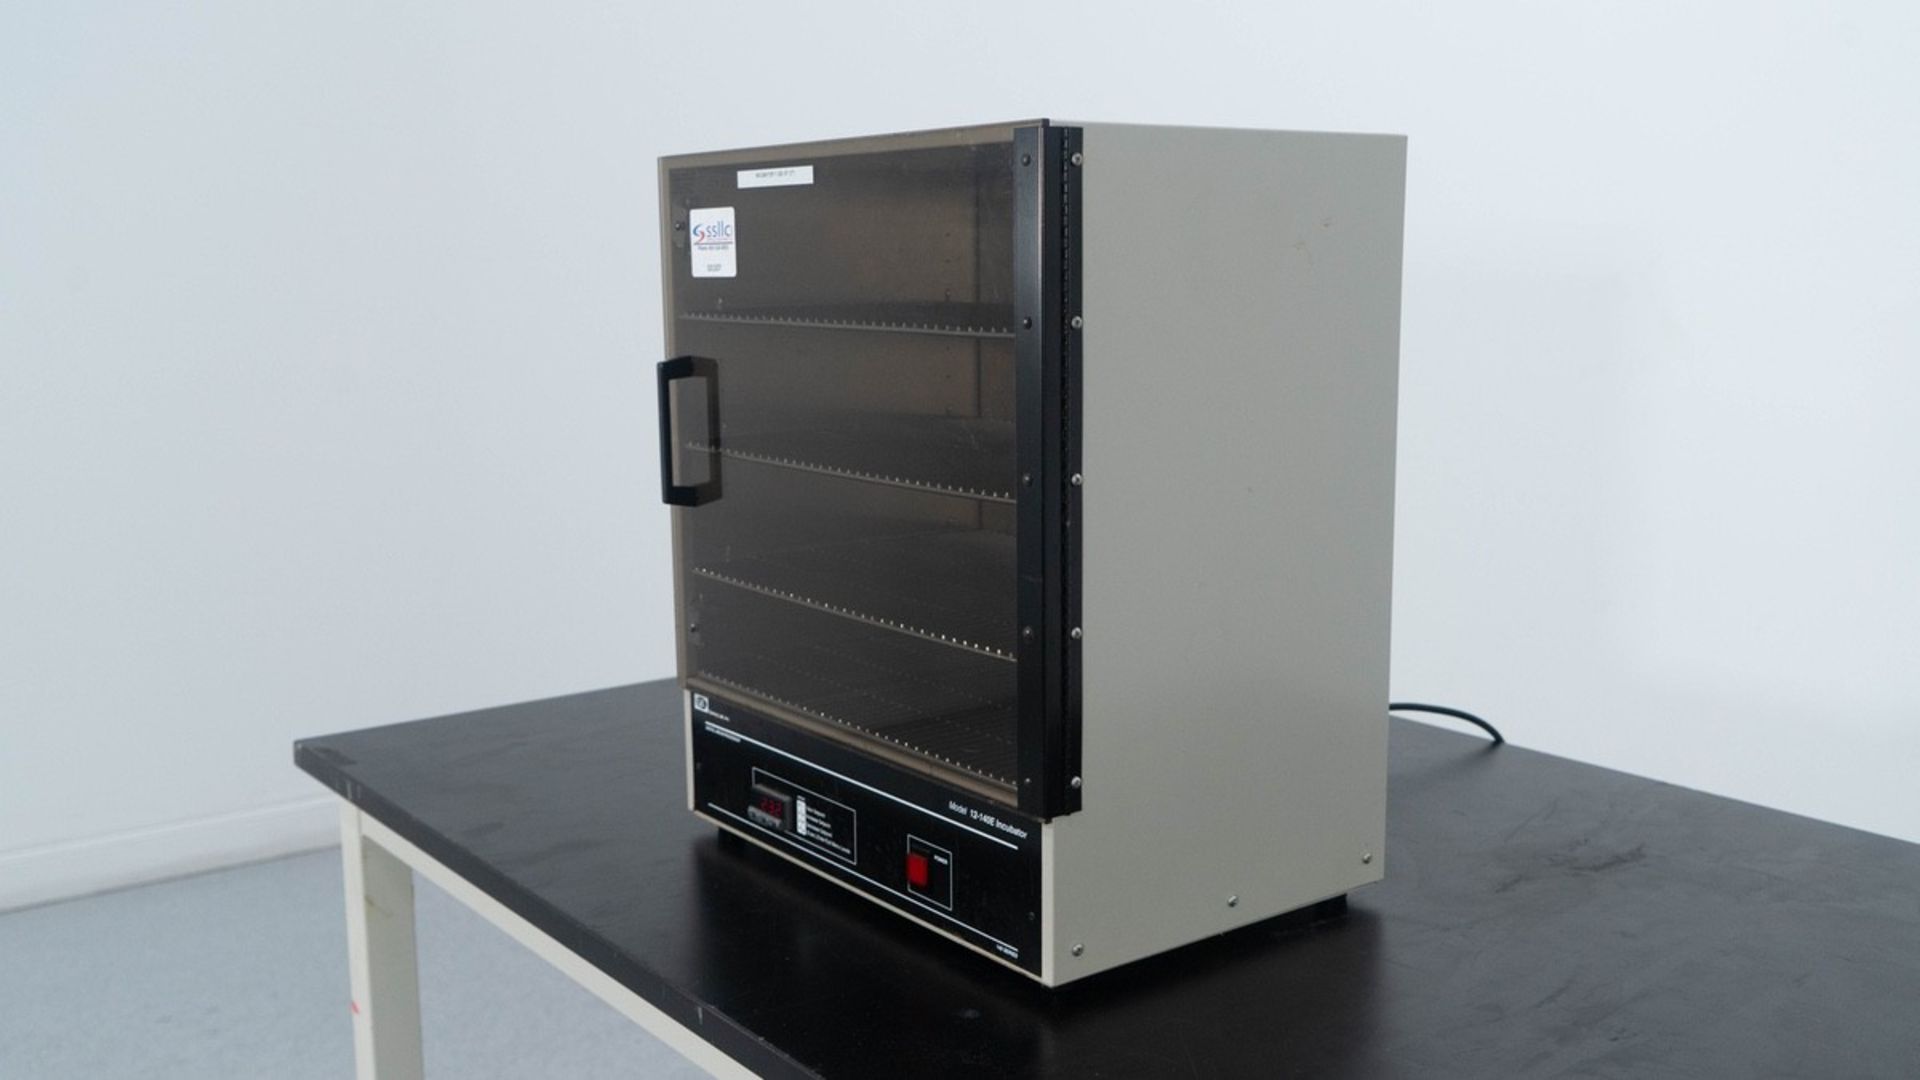 Quincy Lab 12-140E Benchtop Incubator, Model 12-140E, S/N: P-00676, Electrical: 115 | Rig Fee: $25 - Image 3 of 5